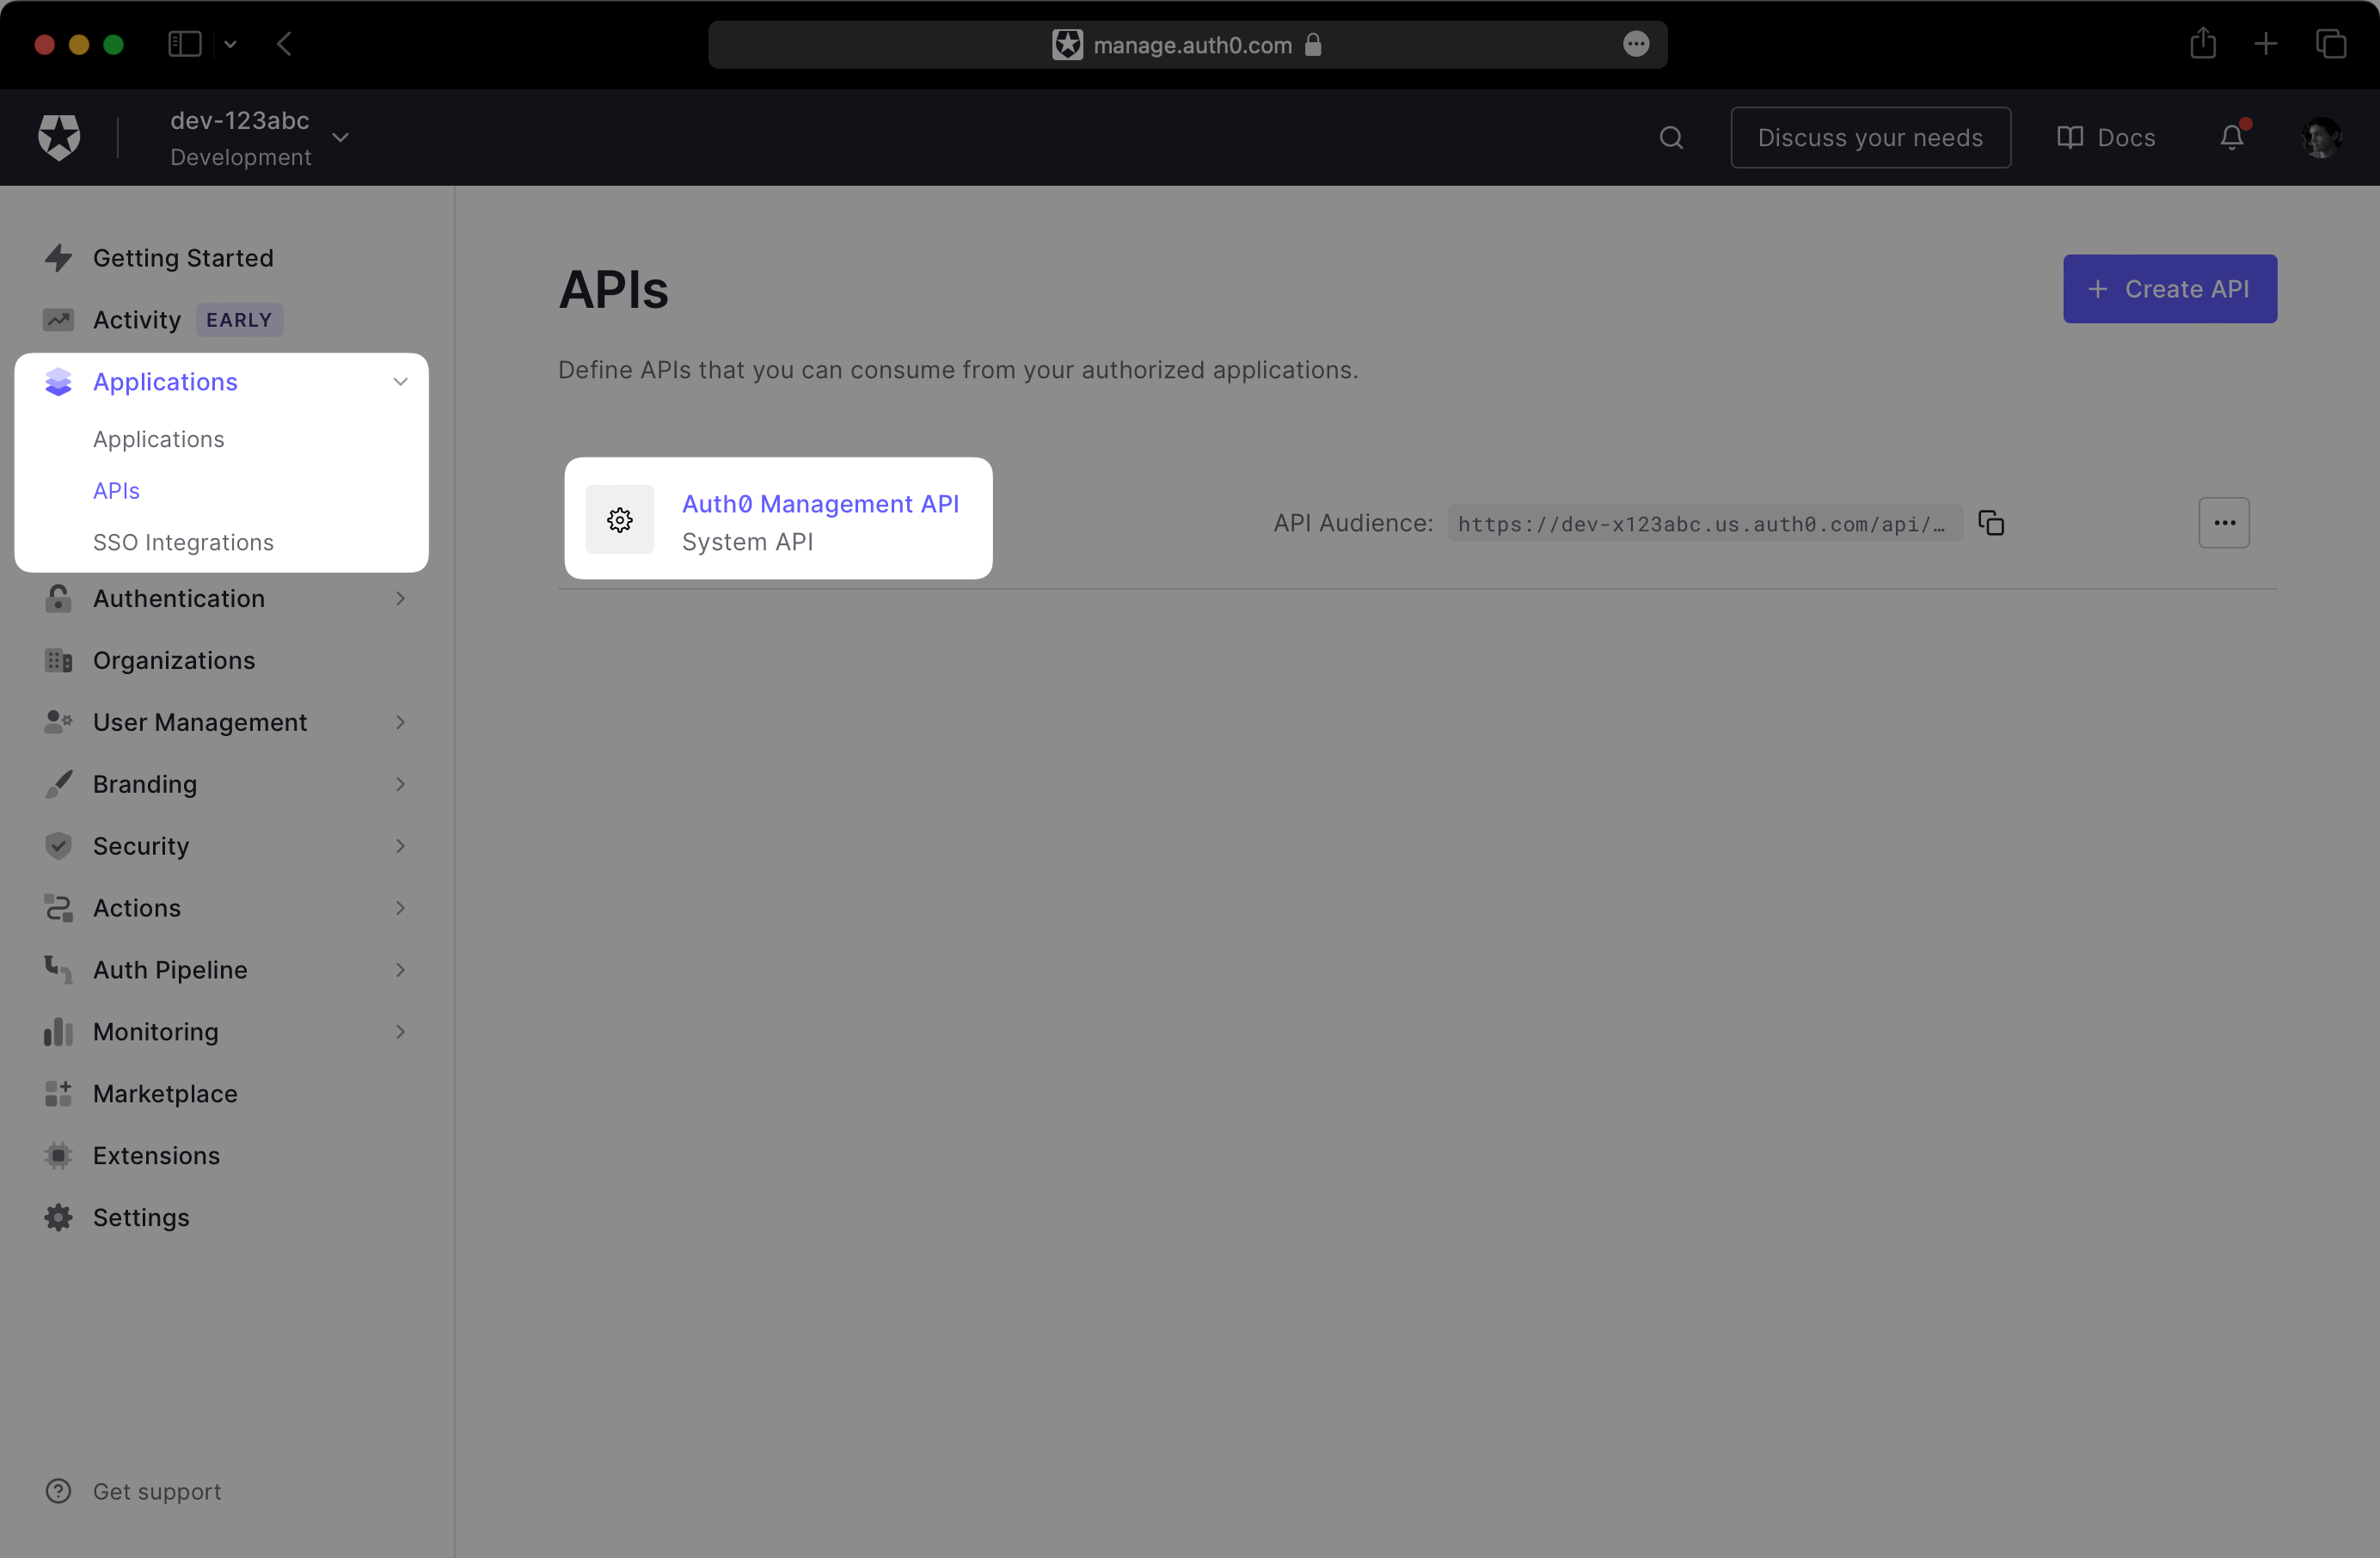 A screenshot showing the “Auth0 Management API” entry on the Auth0 APIs page.